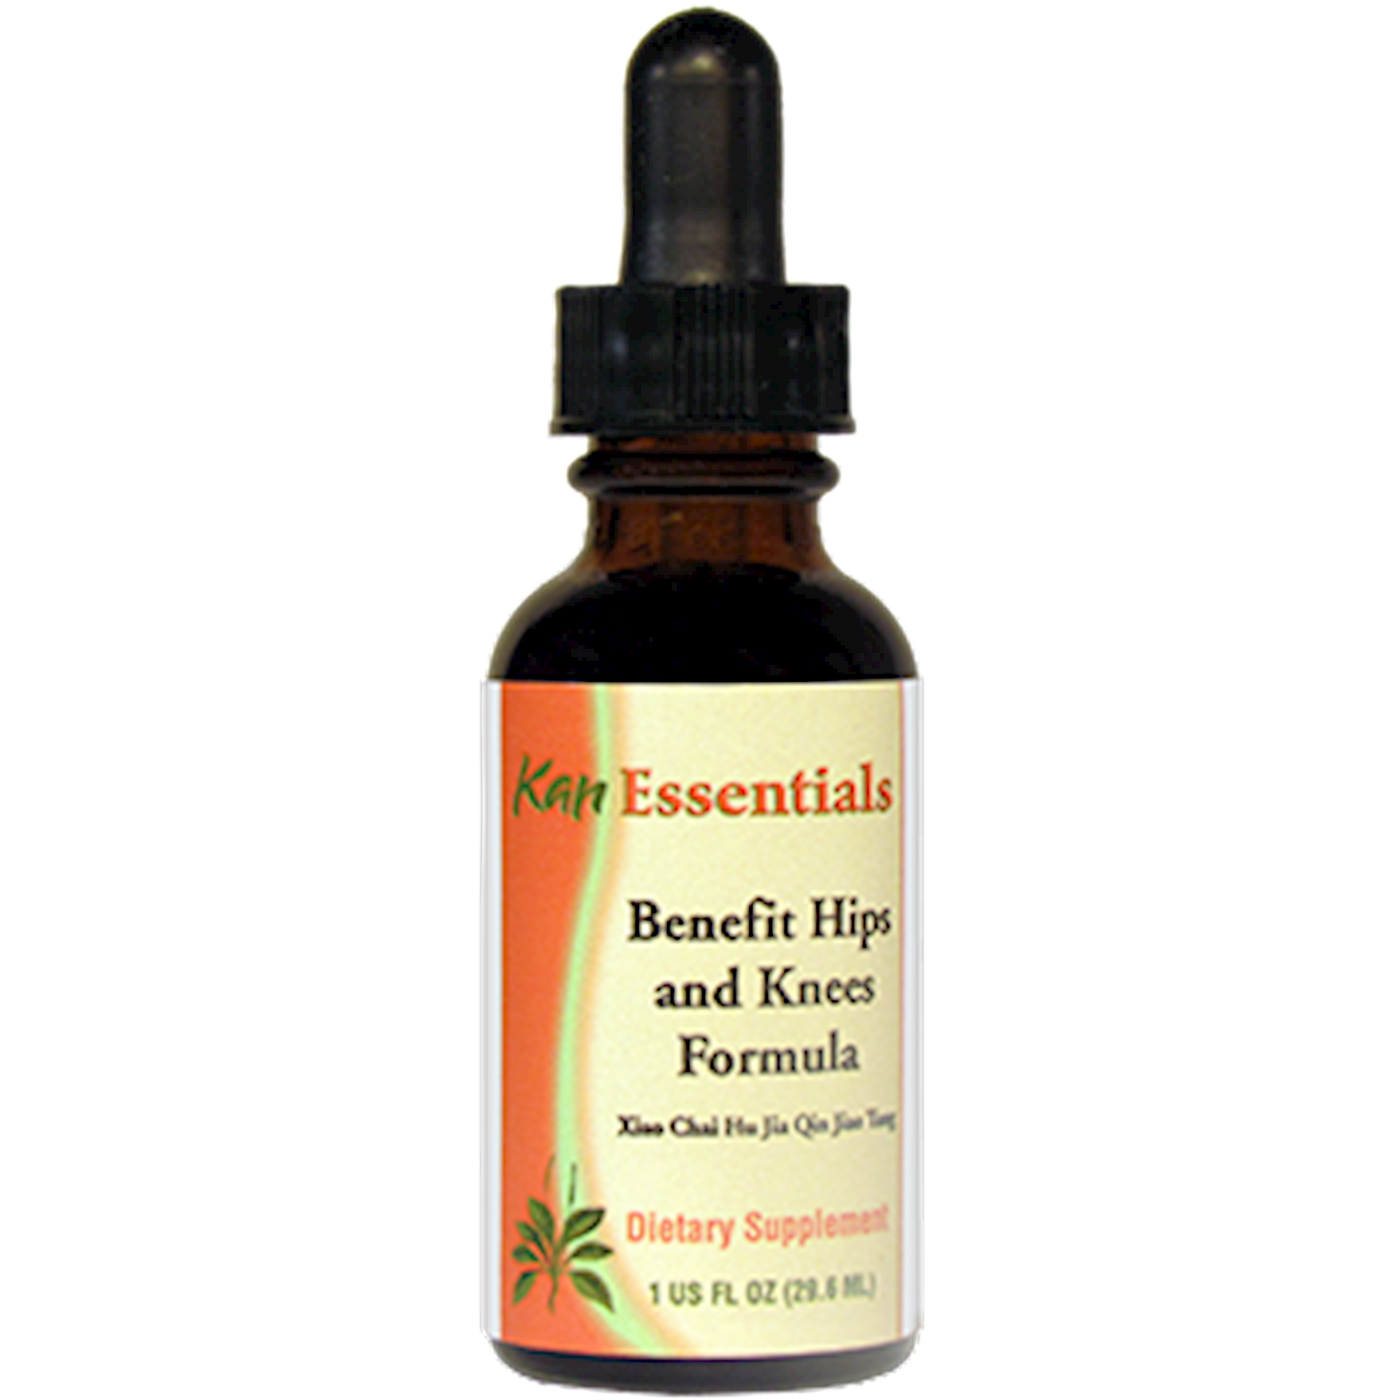 Benefit Hips and Knees  Curated Wellness